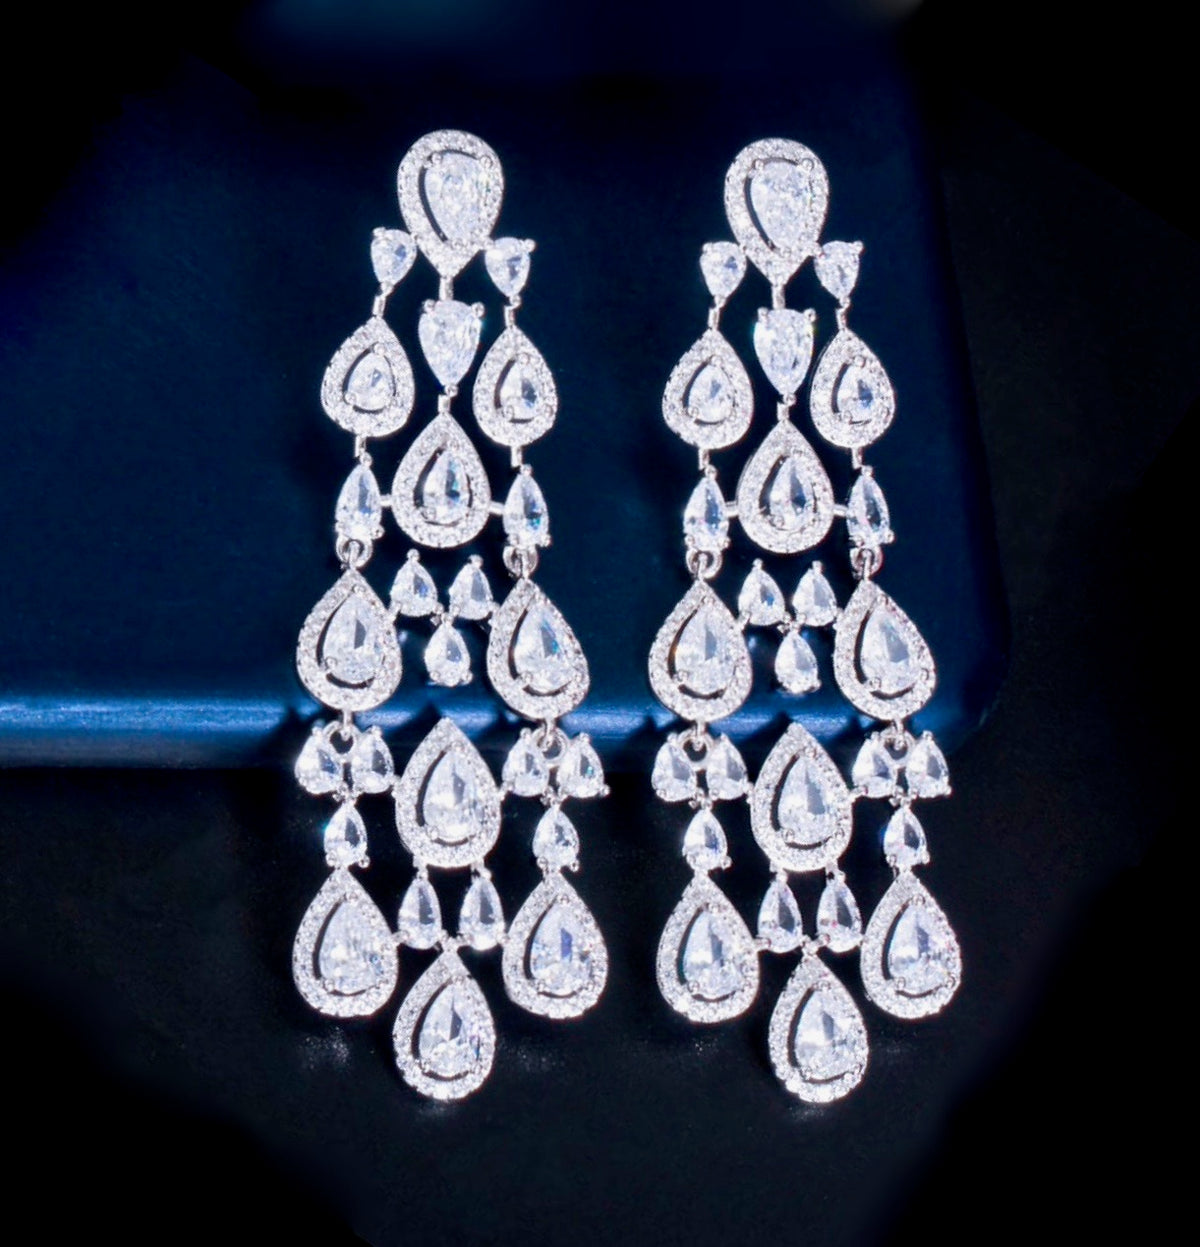 Matching Luxury Bridal Earrings to a White Dress